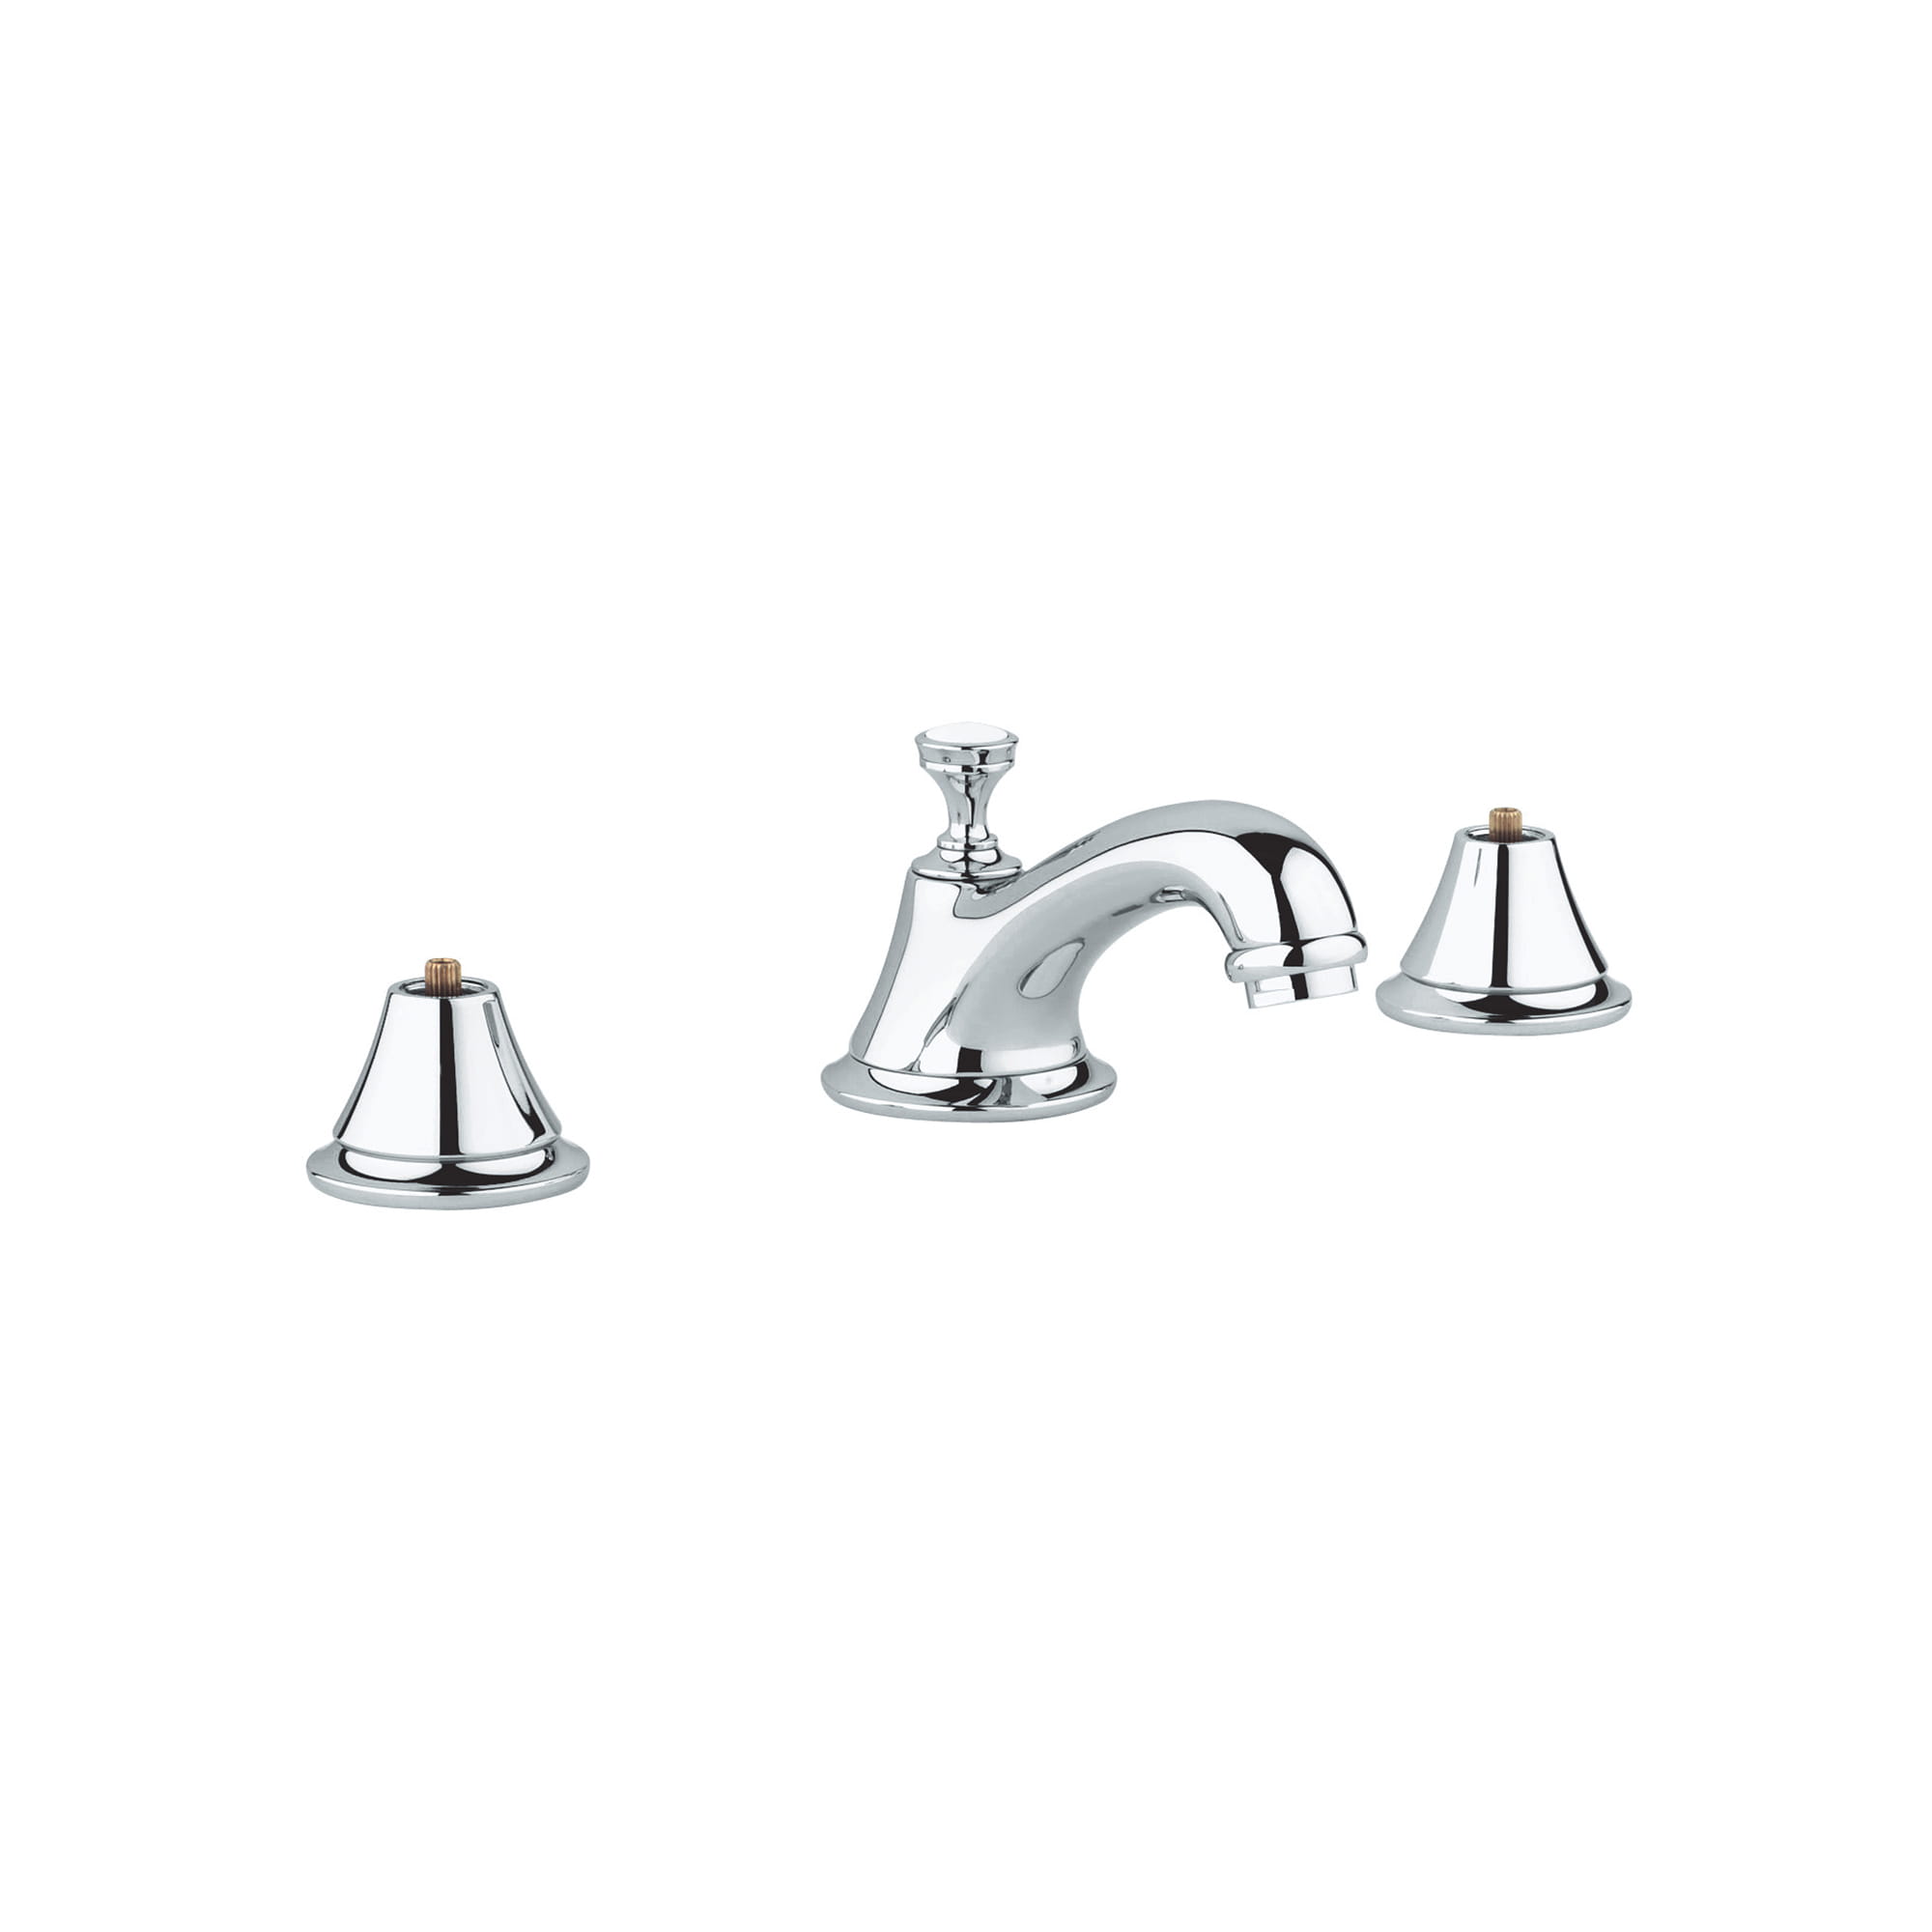 8-INCH WIDESPREAD 2-HANDLE S-SIZE BATHROOM FAUCET 1.2 GPM-related